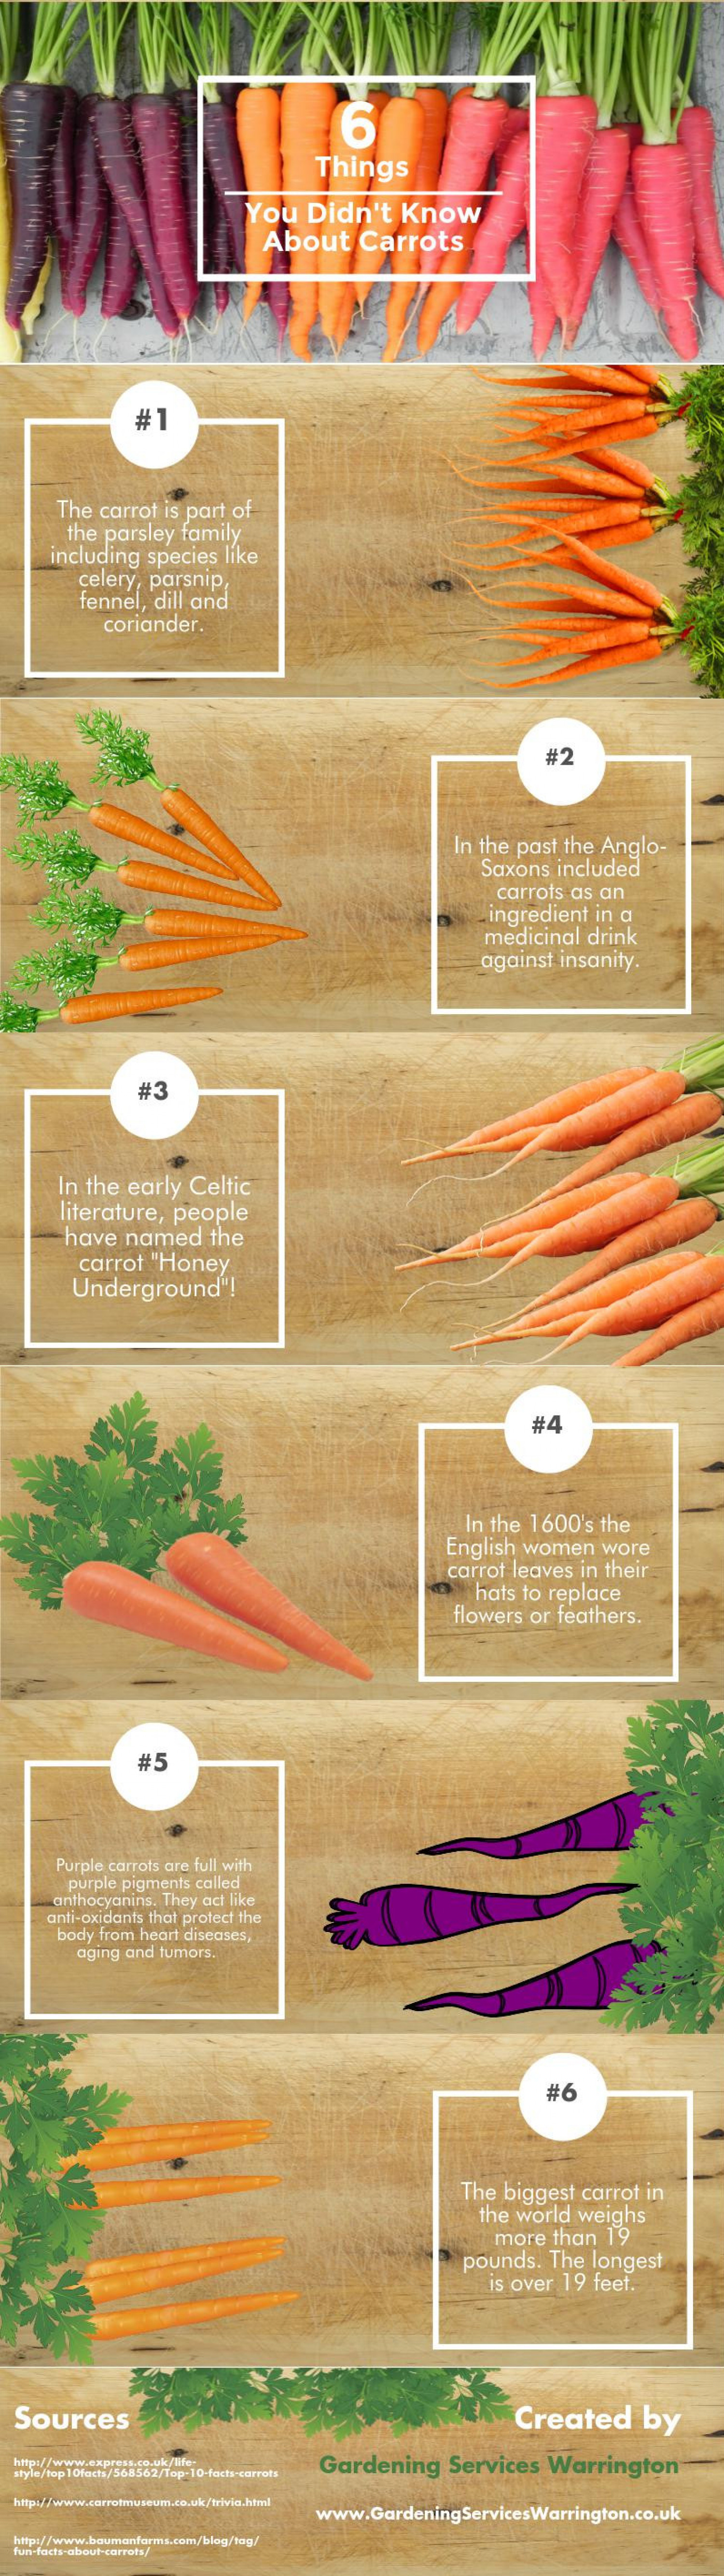 6 Things You Didn't Know About Carrots Infographic